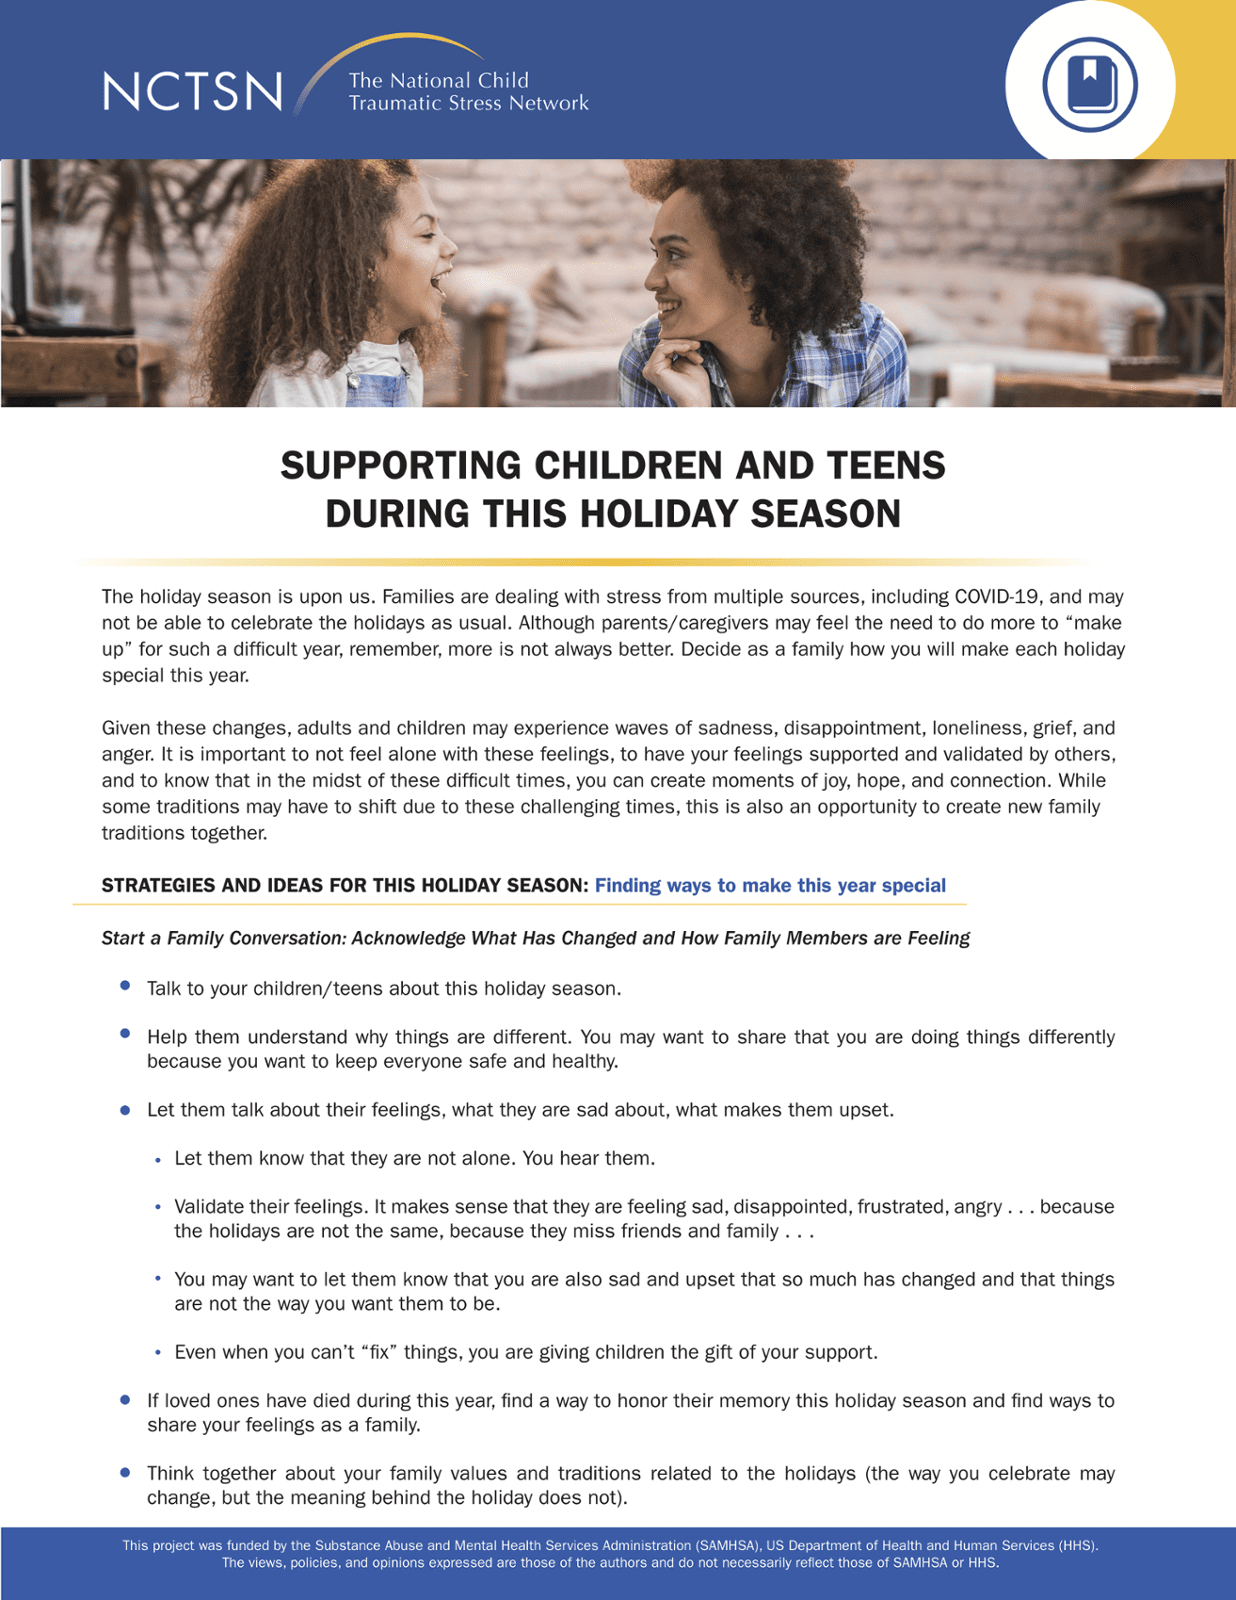 Tips for Supporting Children and Teens during this Holiday Season